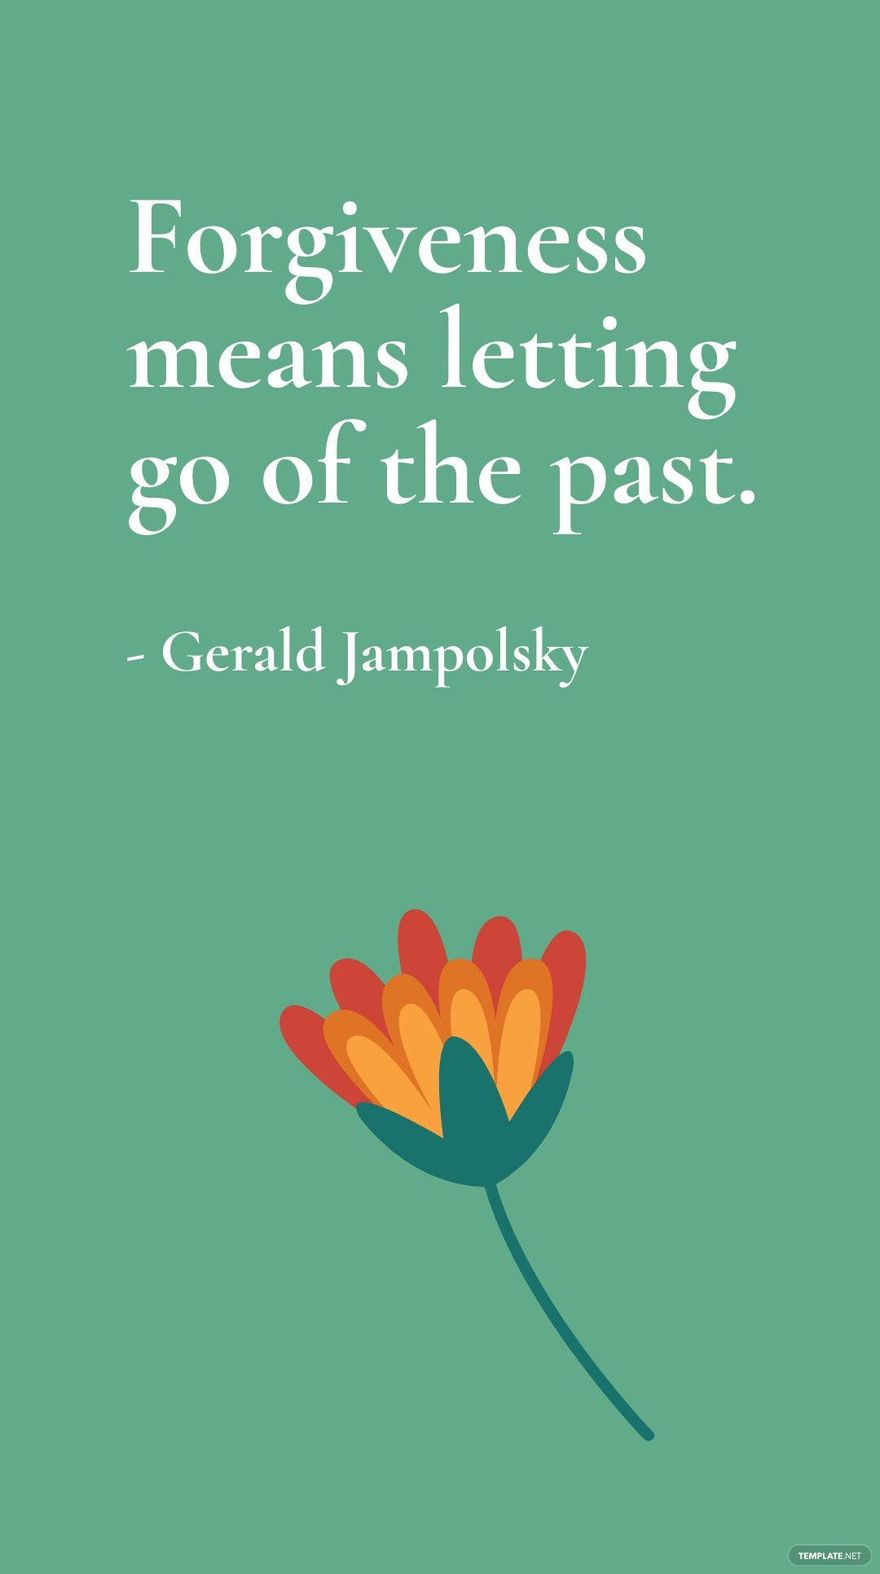 Free Gerald Jampolsky - Forgiveness means letting go of the past. in JPG